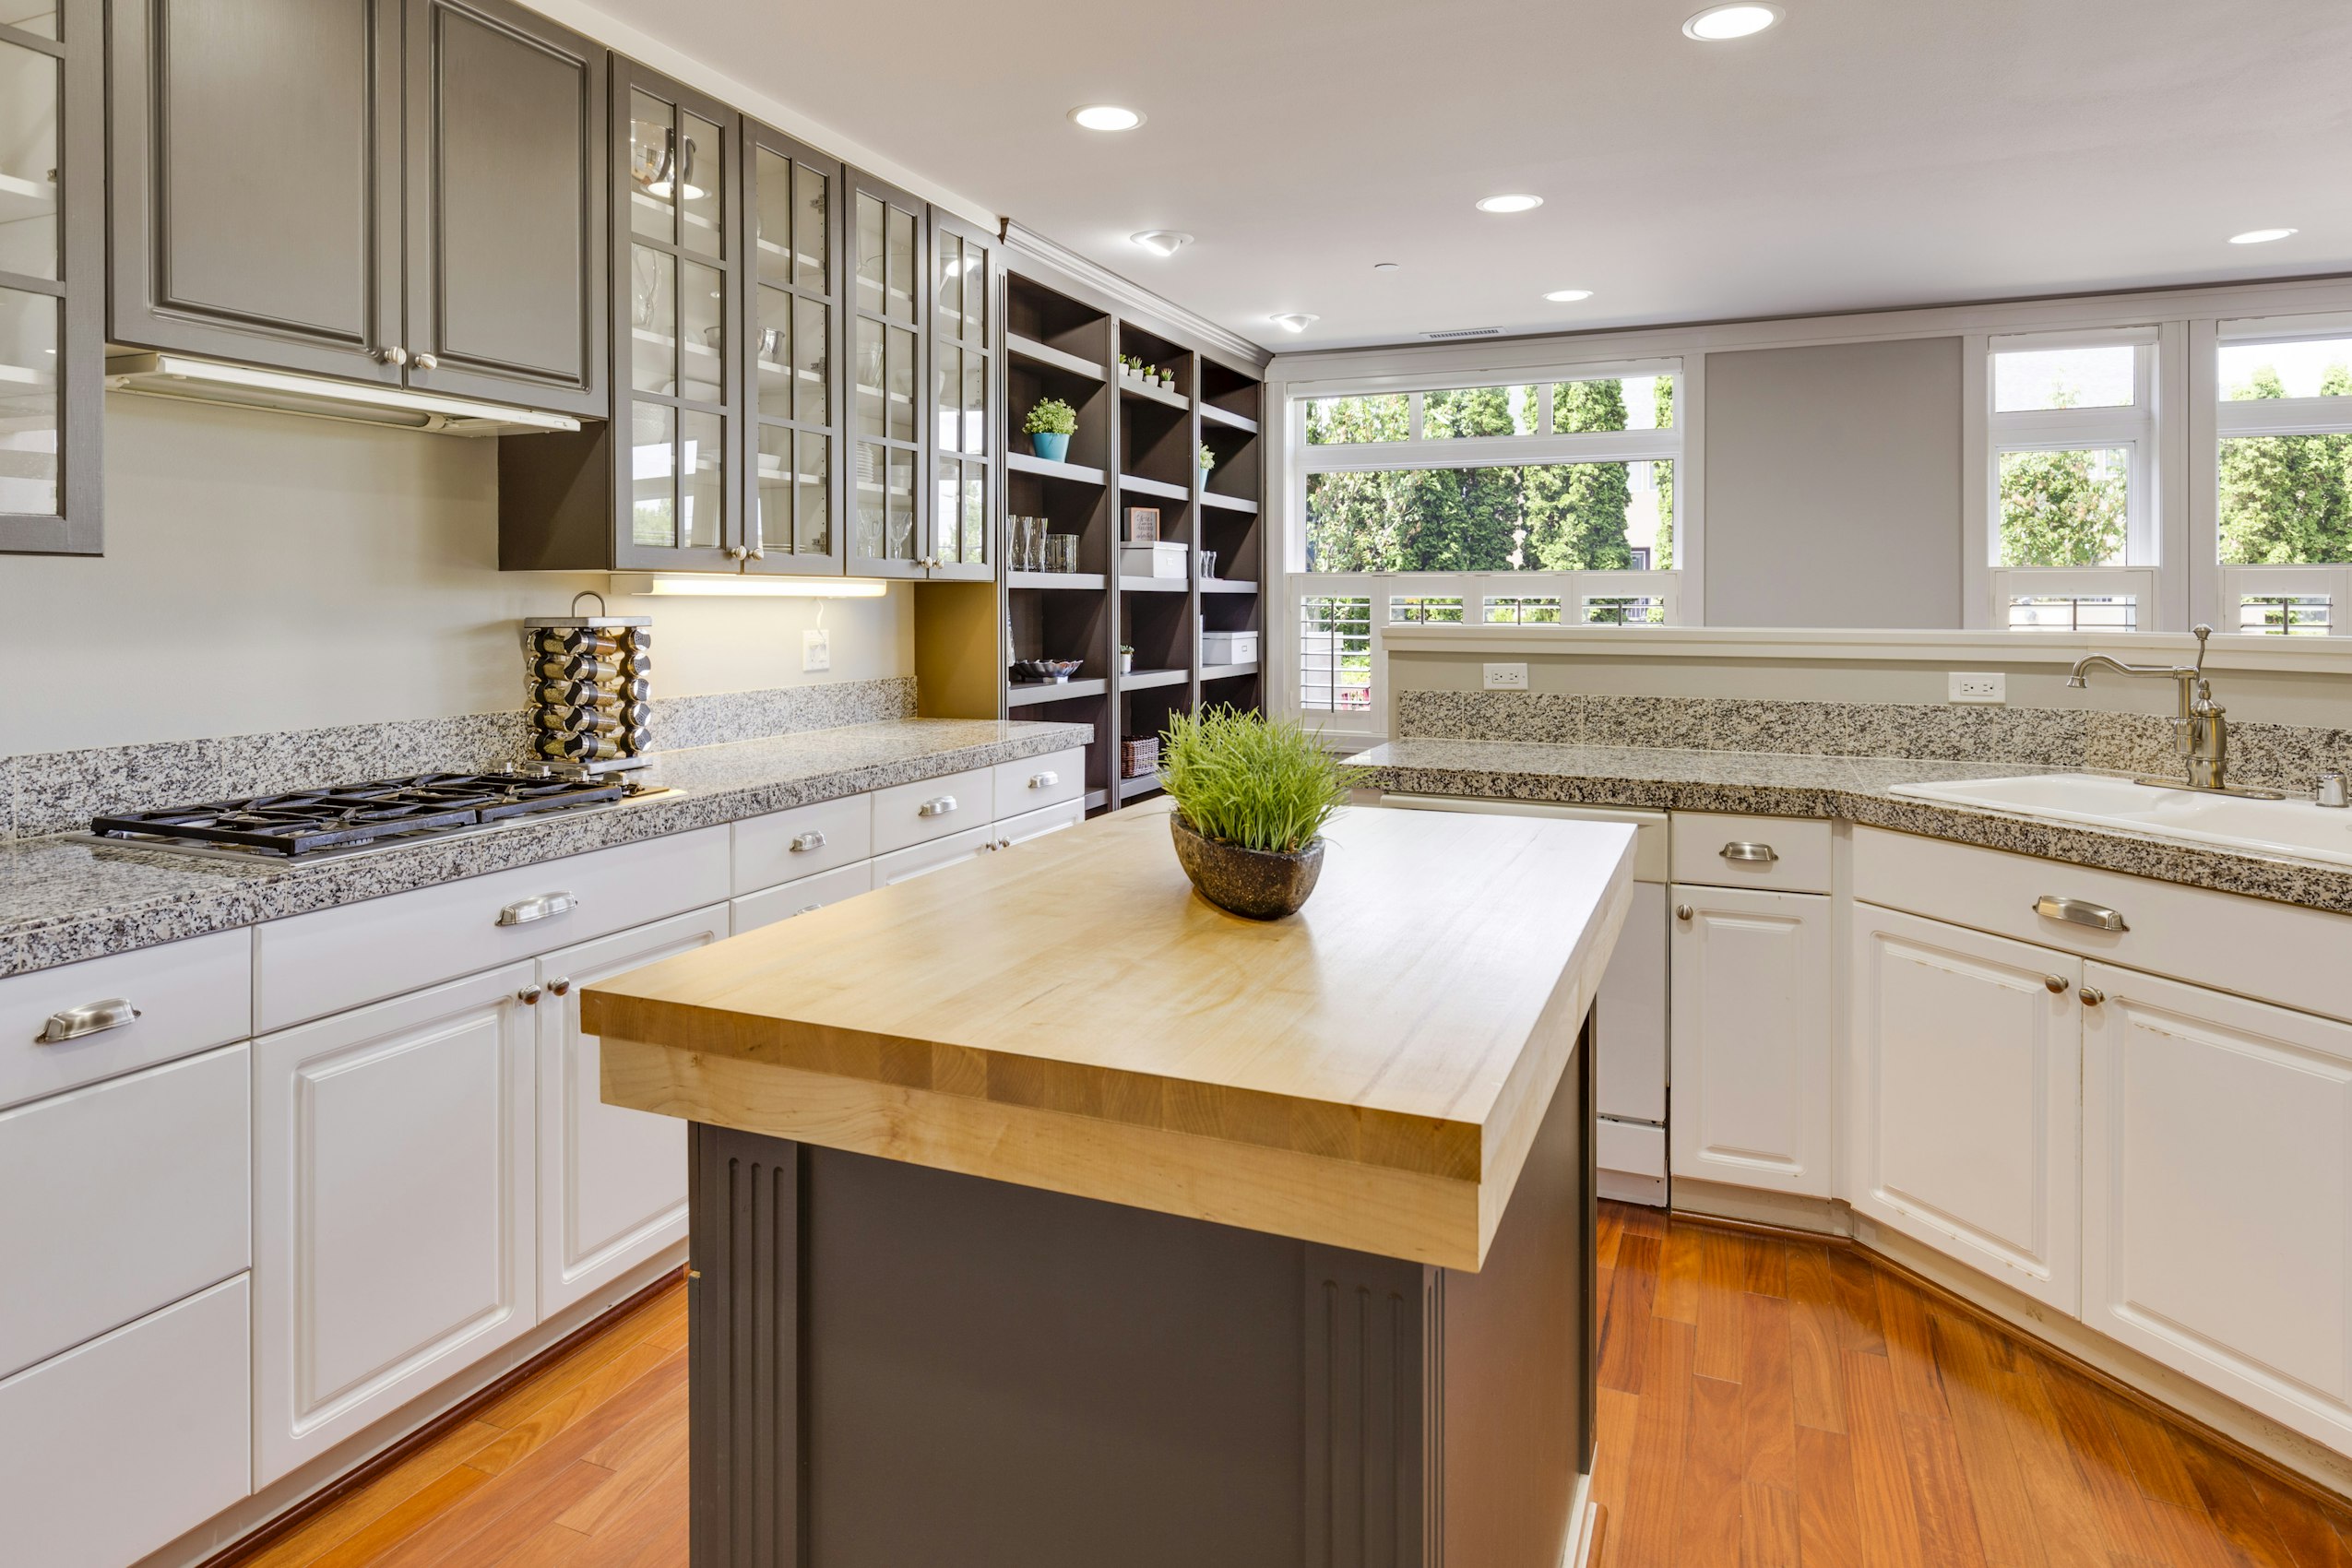 Redoing Your Kitchen Countertops Consider These Options The